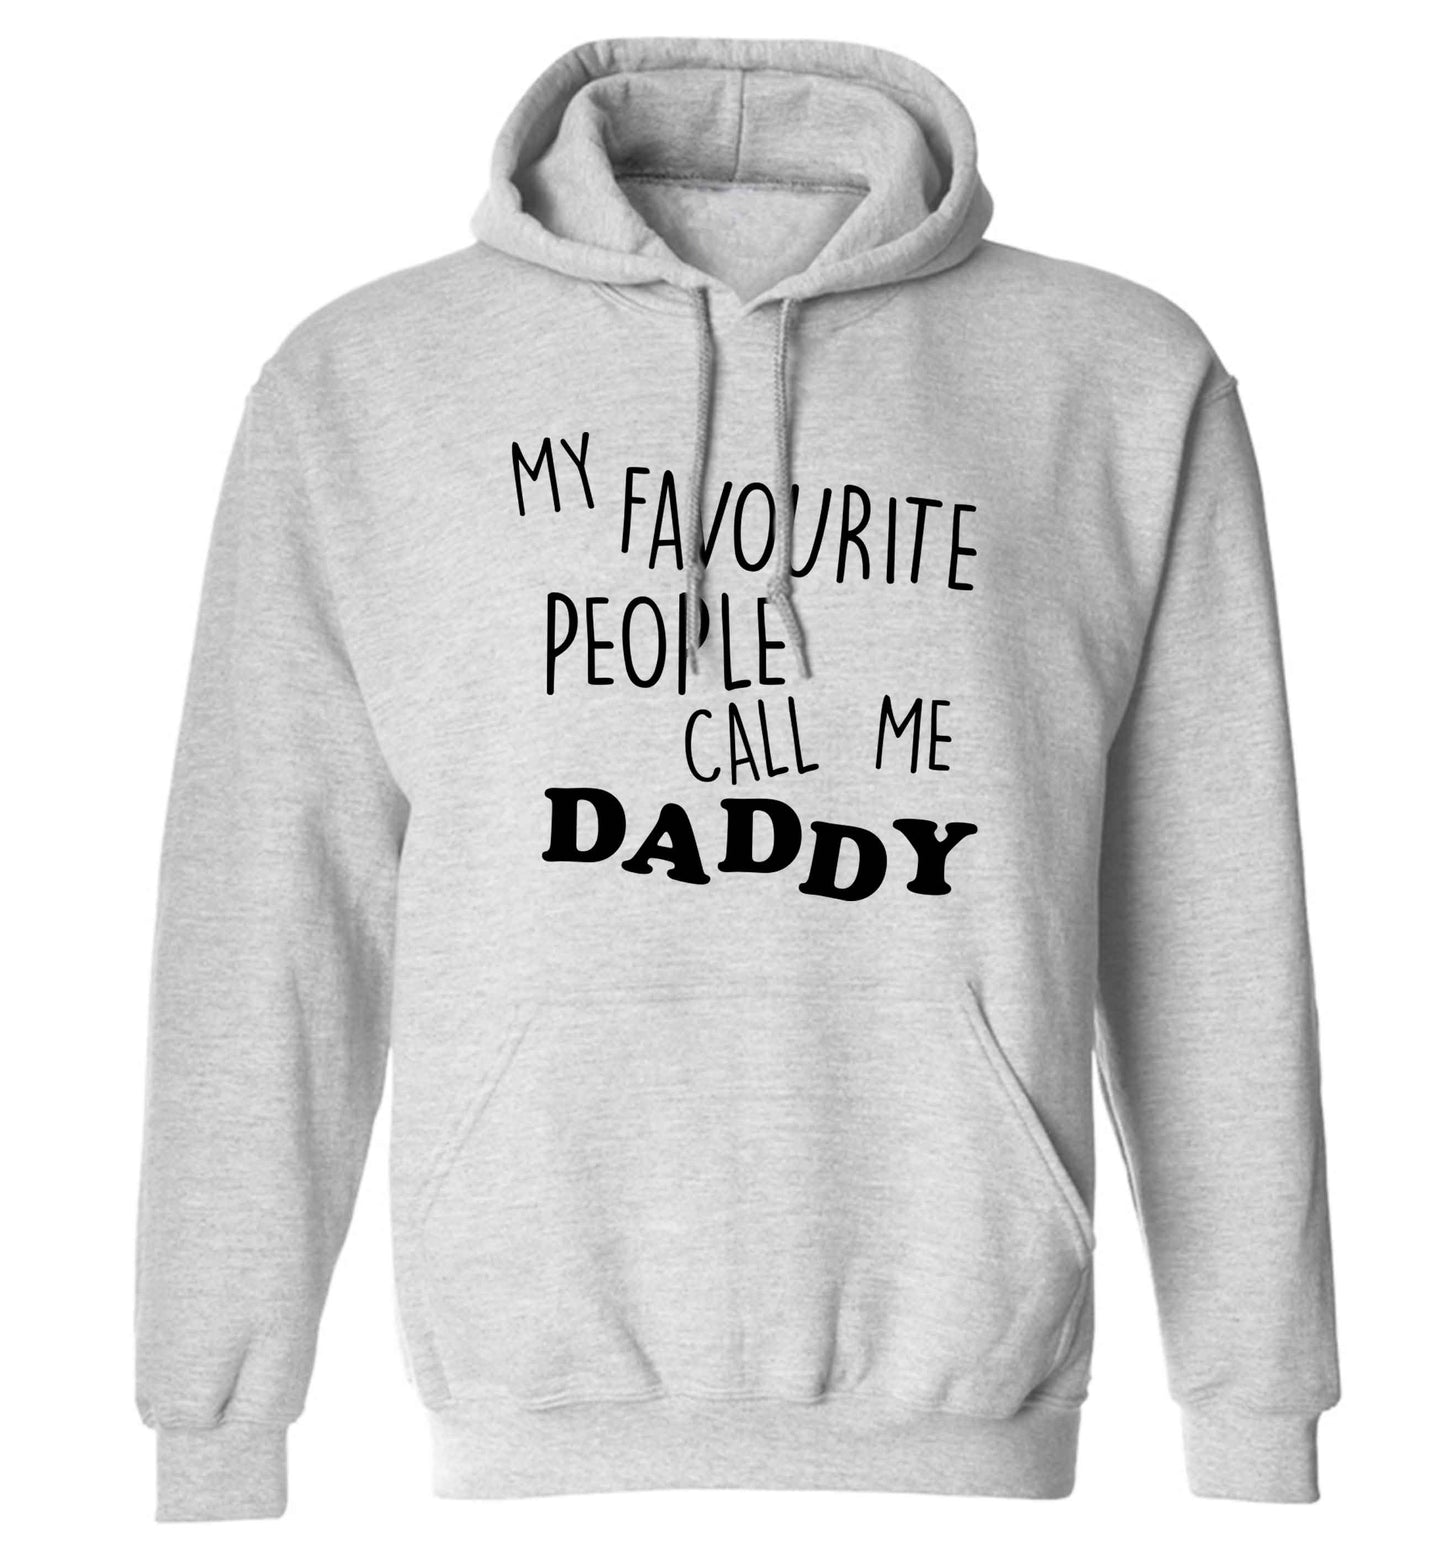 My favourite people call me daddy adults unisex grey hoodie 2XL